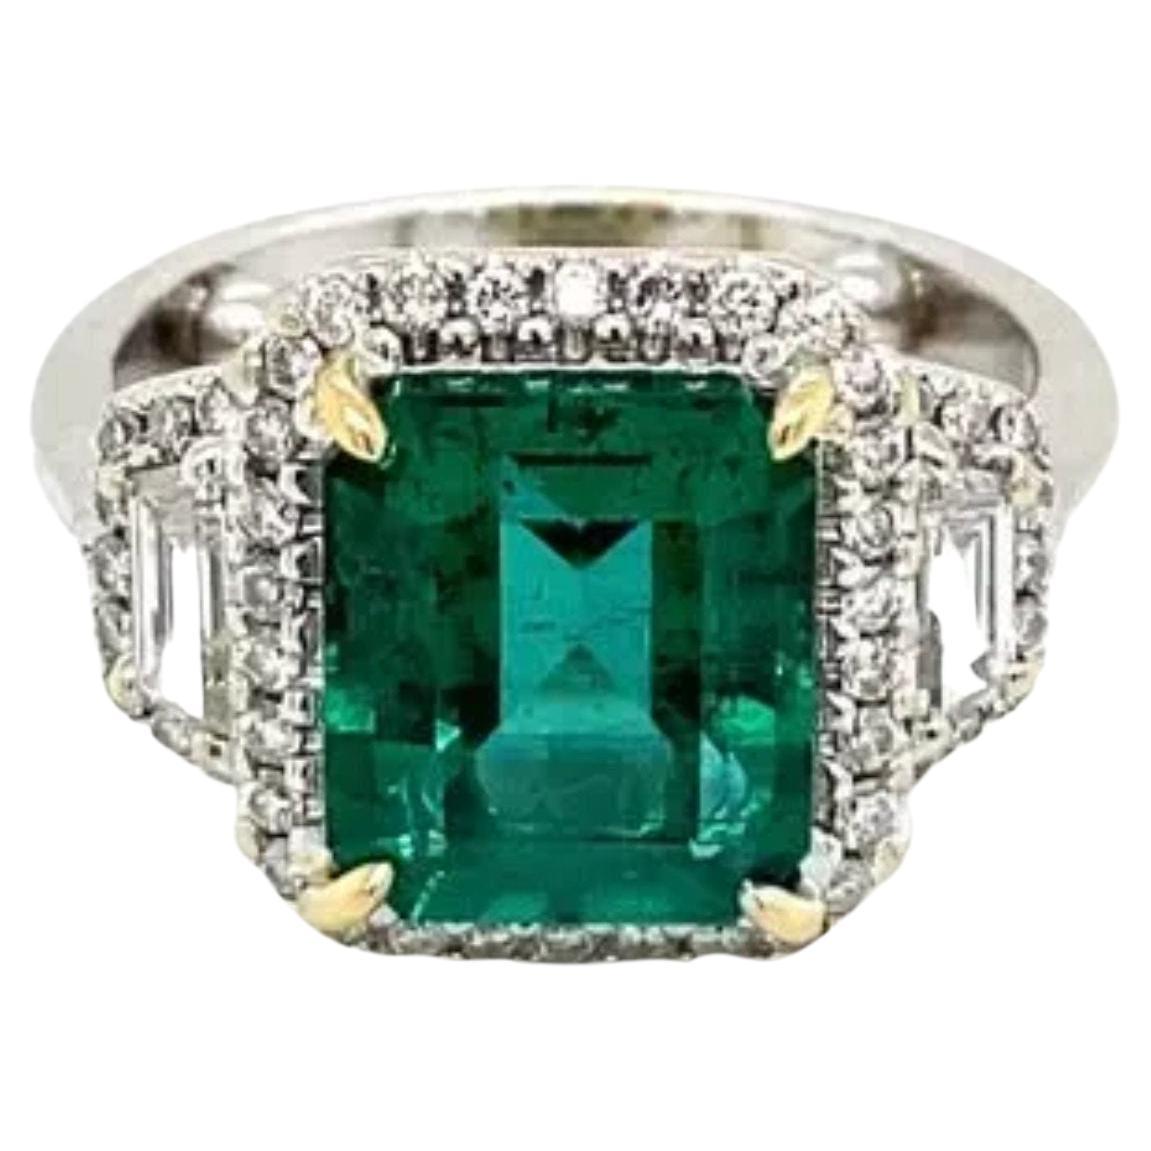 For Sale:  Emerald Engagement Ring, Emerald Cut Emerald Wedding Ring